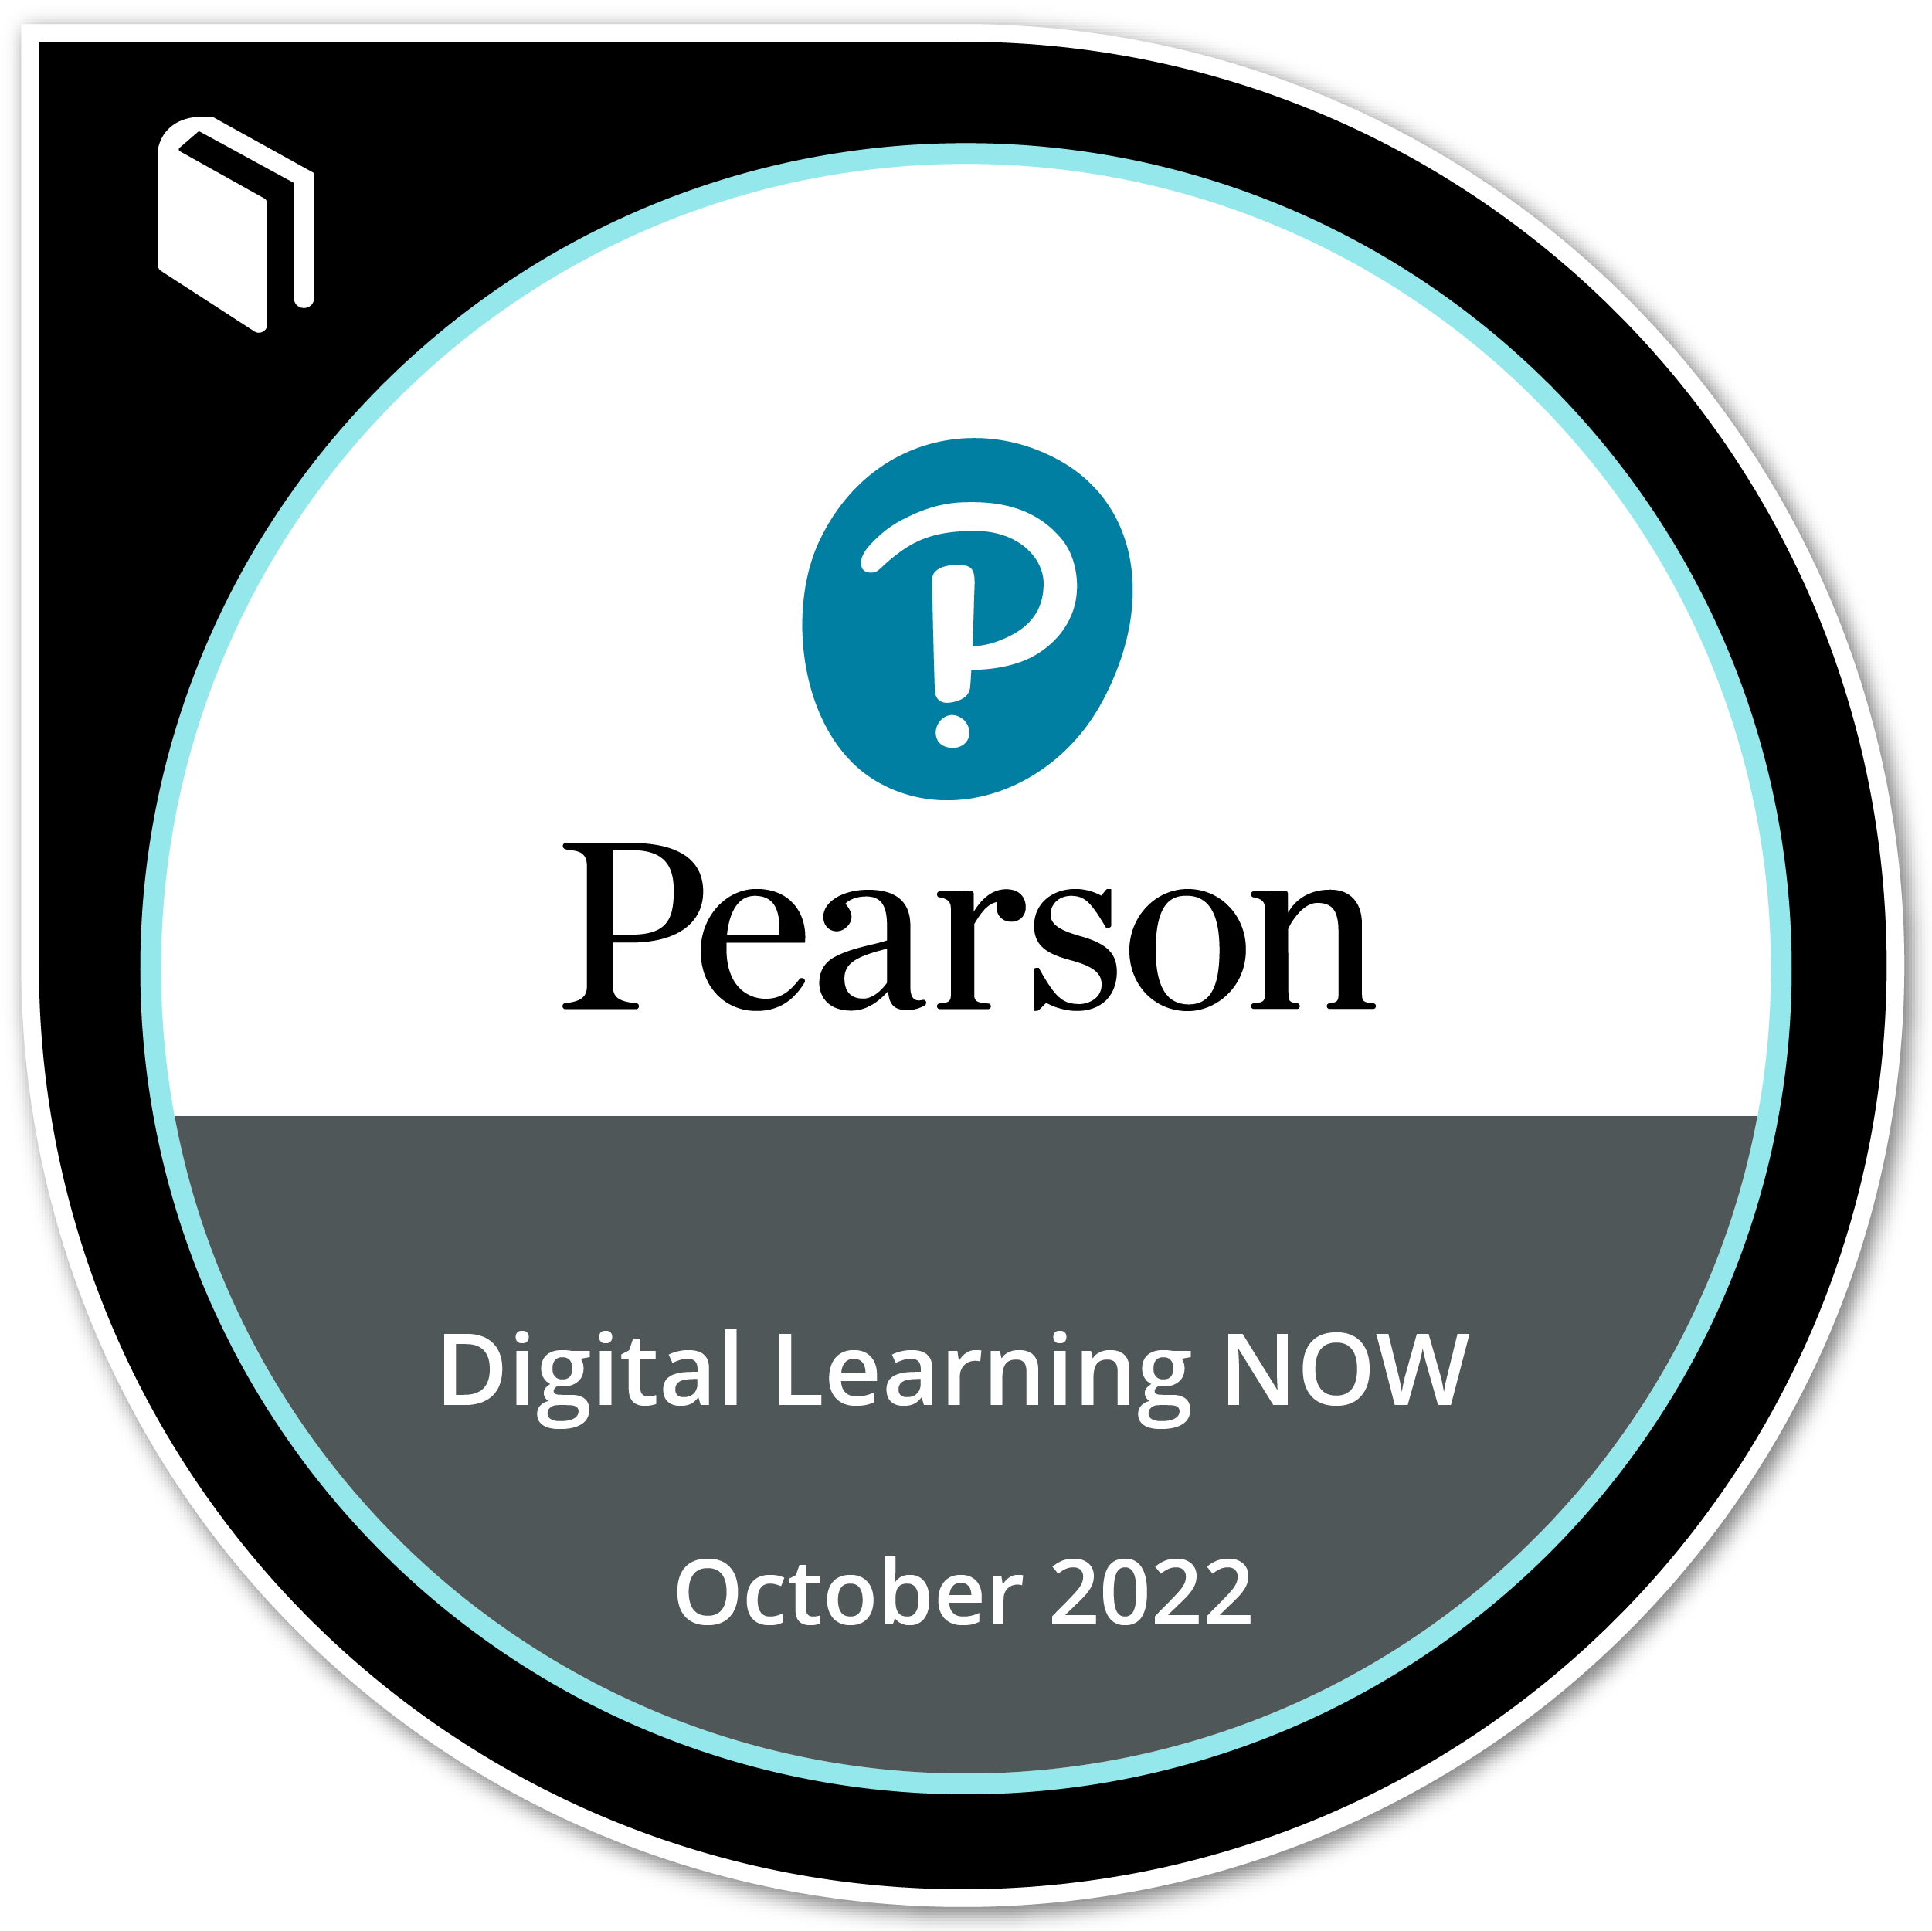 Digital Learning NOW badge